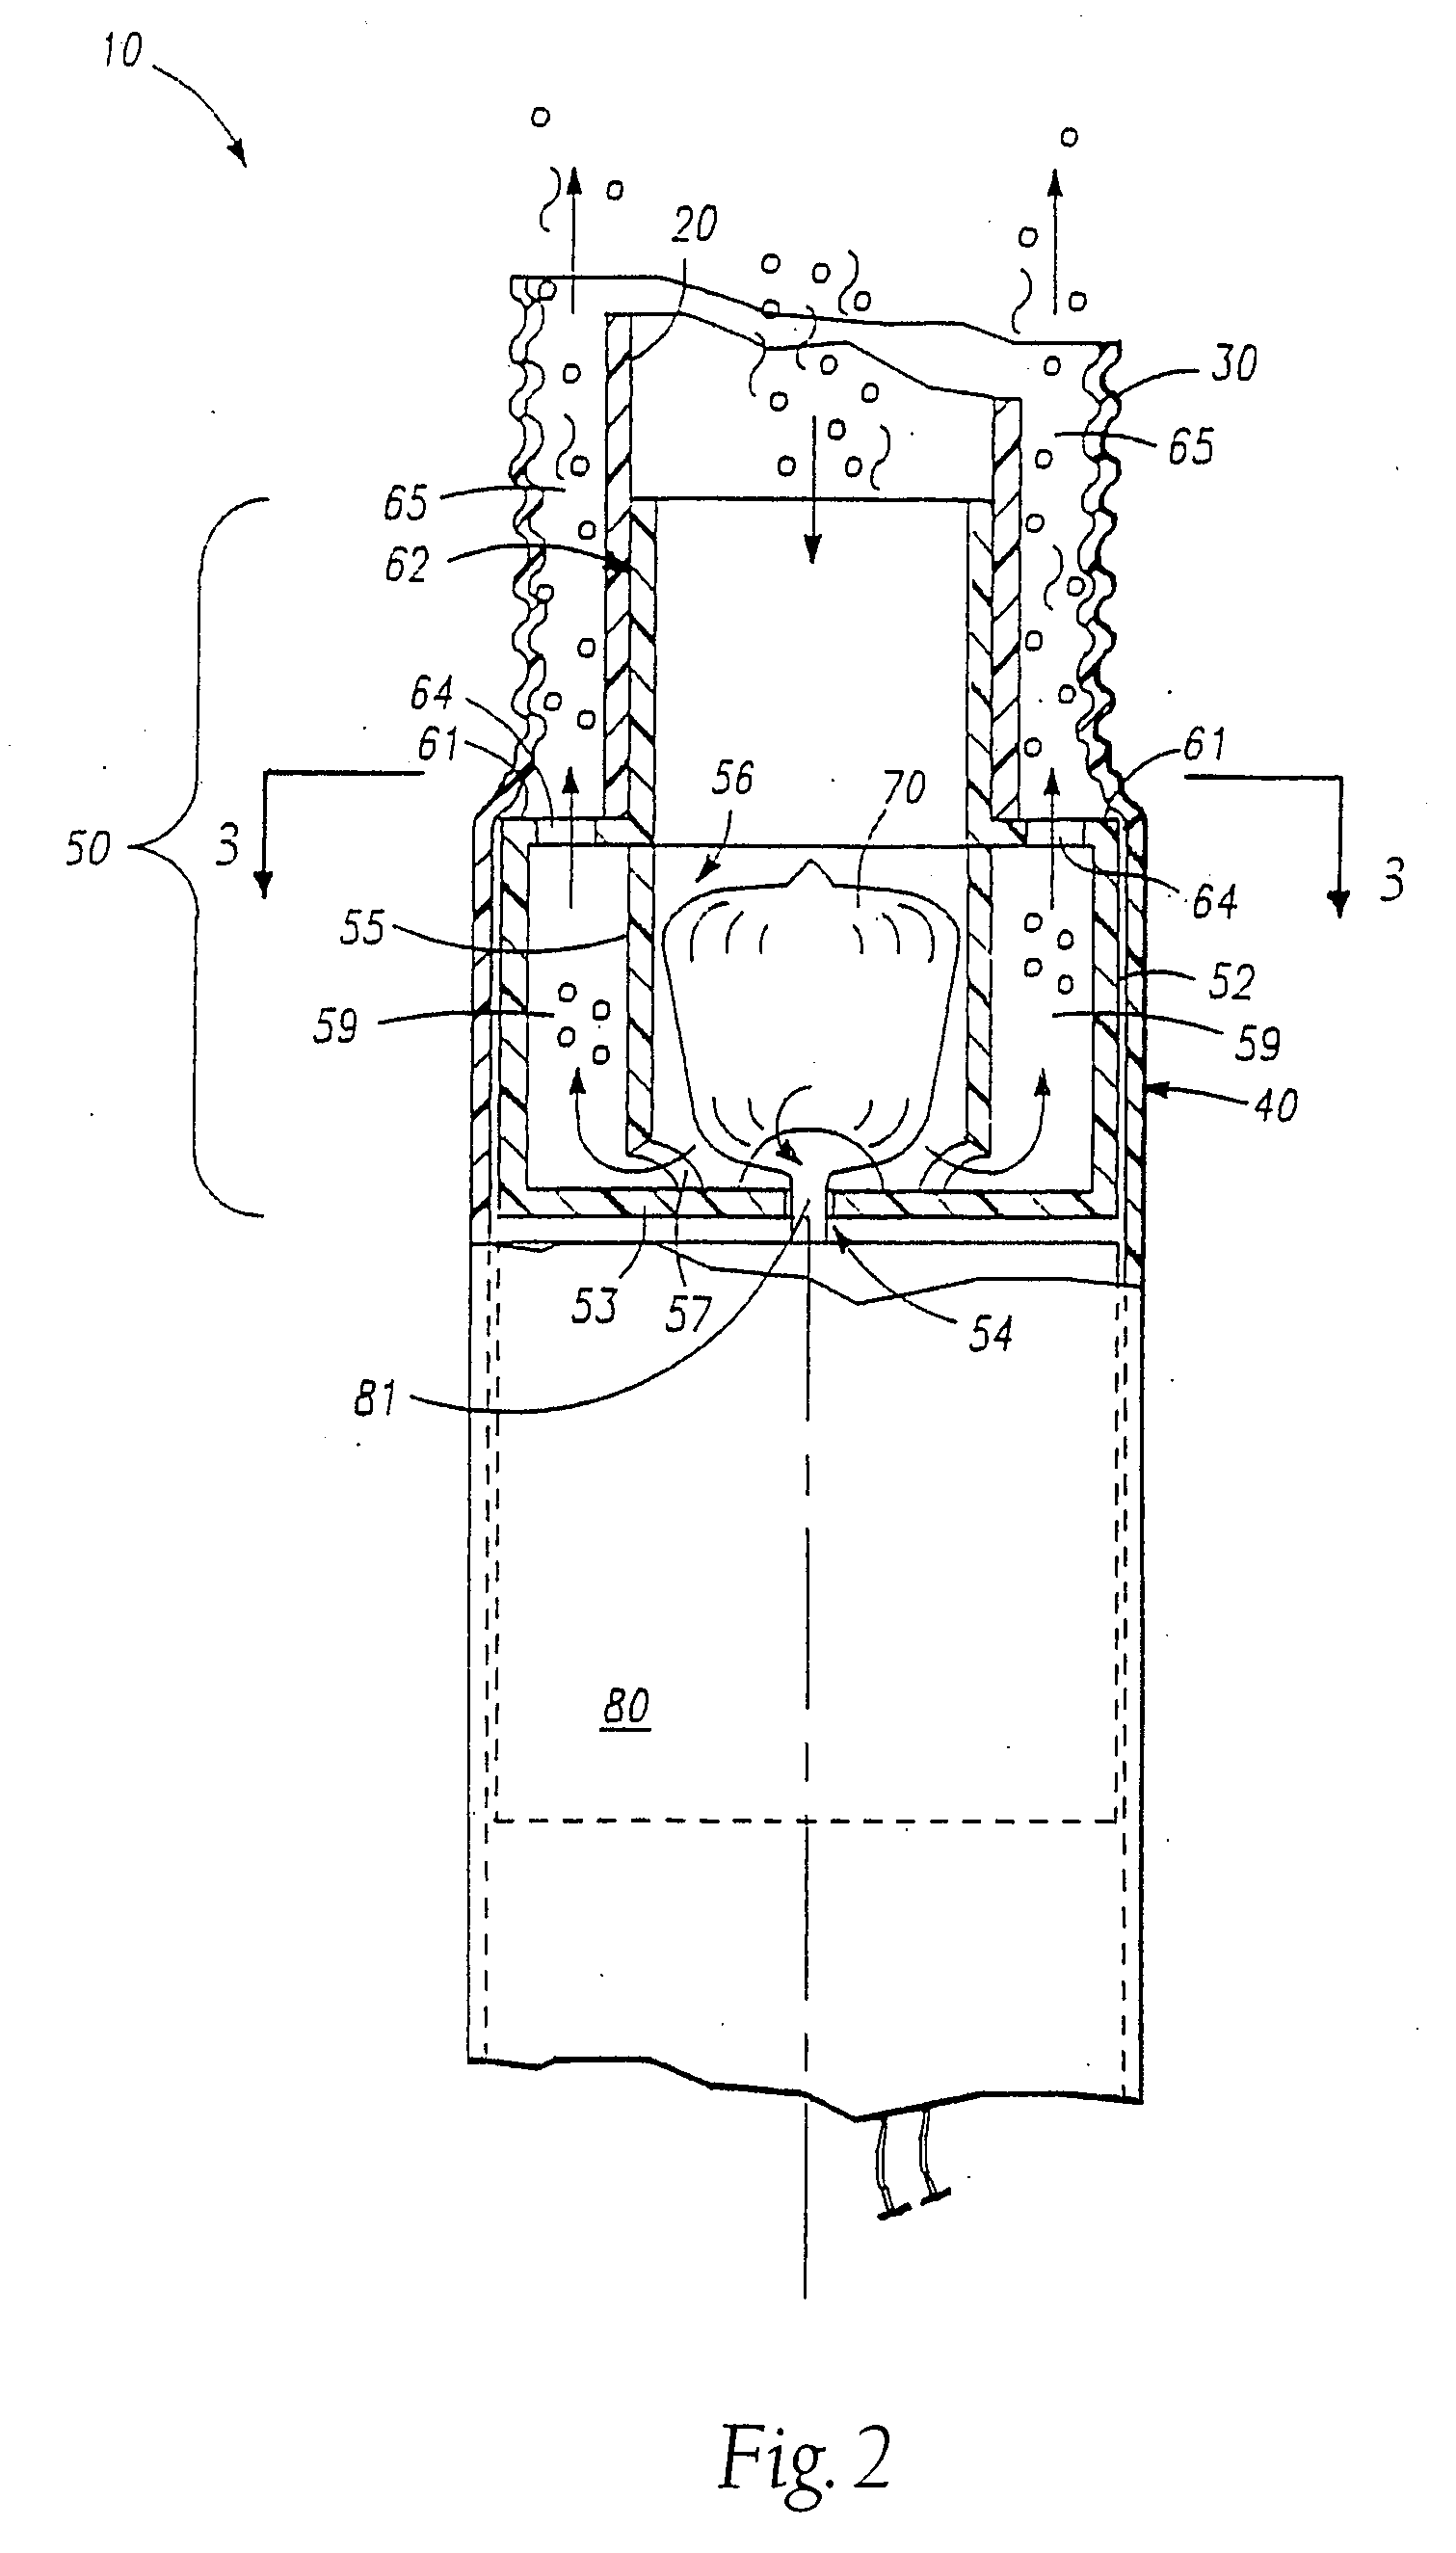 Single port cardiac support apparatus related applications